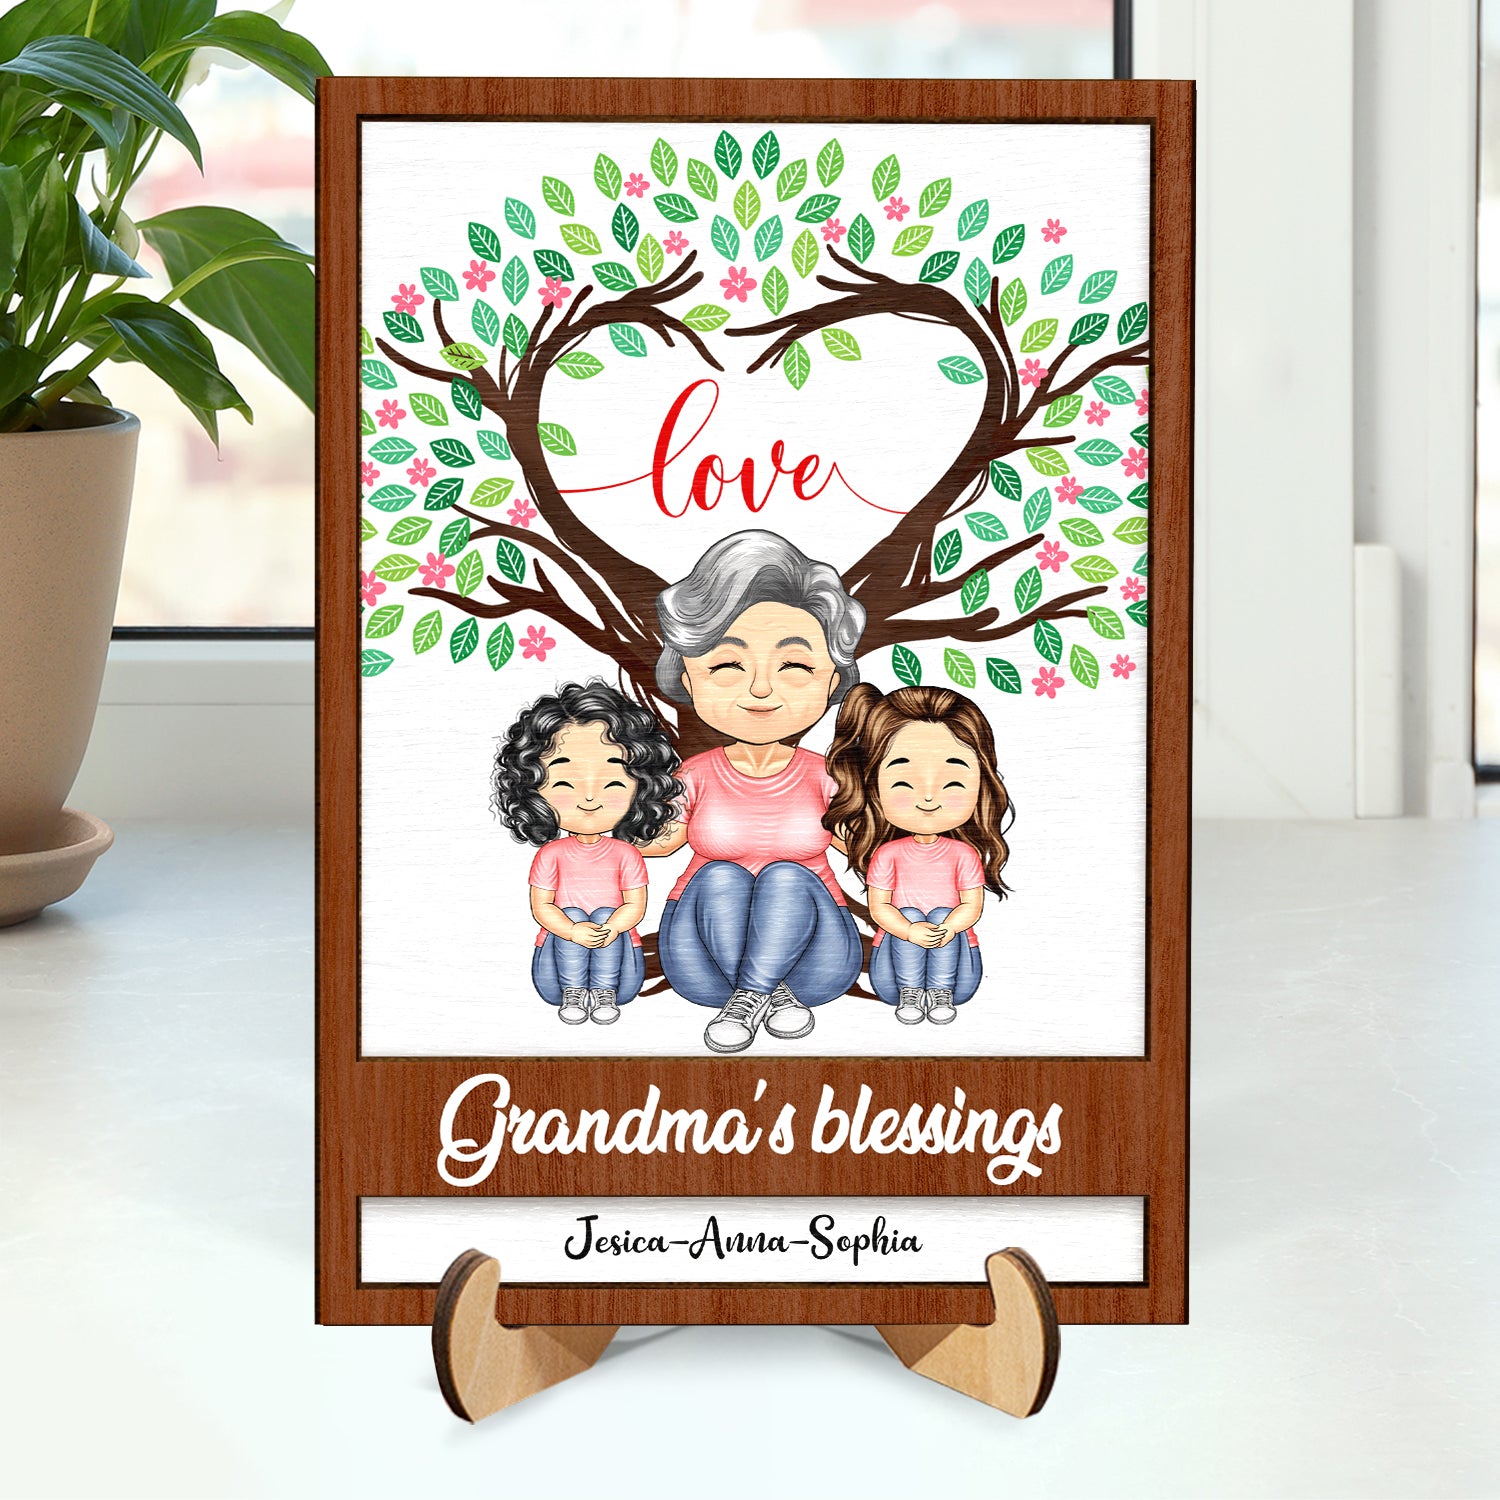 Mom's Grandma's Blessings - Gift For Mother, Grandmother - Personalized 2-Layered Wooden Plaque With Stand